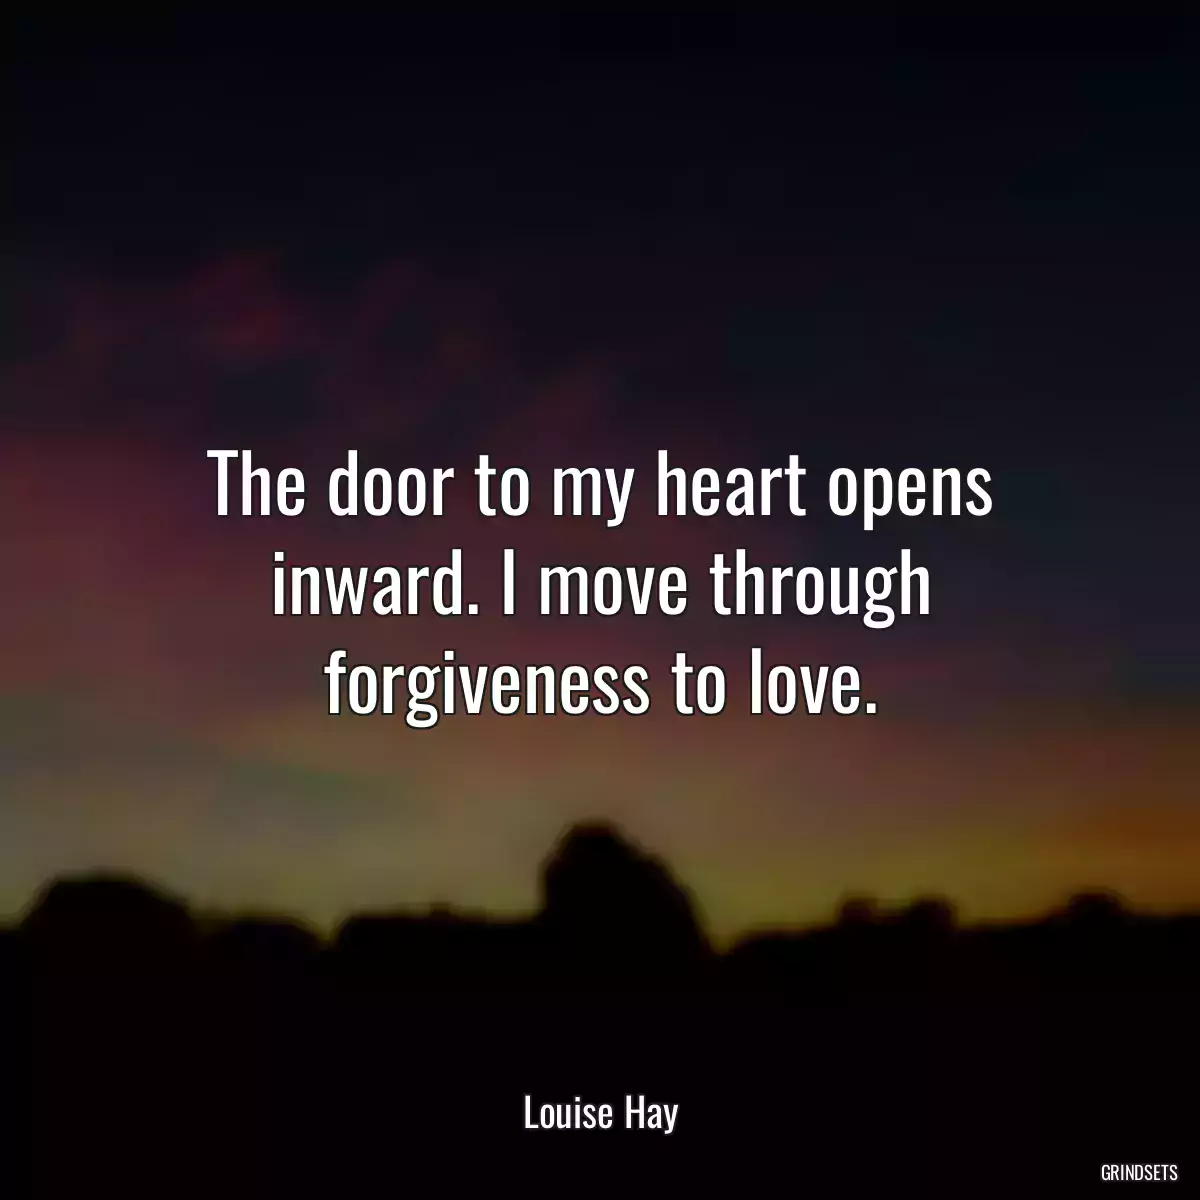 The door to my heart opens inward. I move through forgiveness to love.